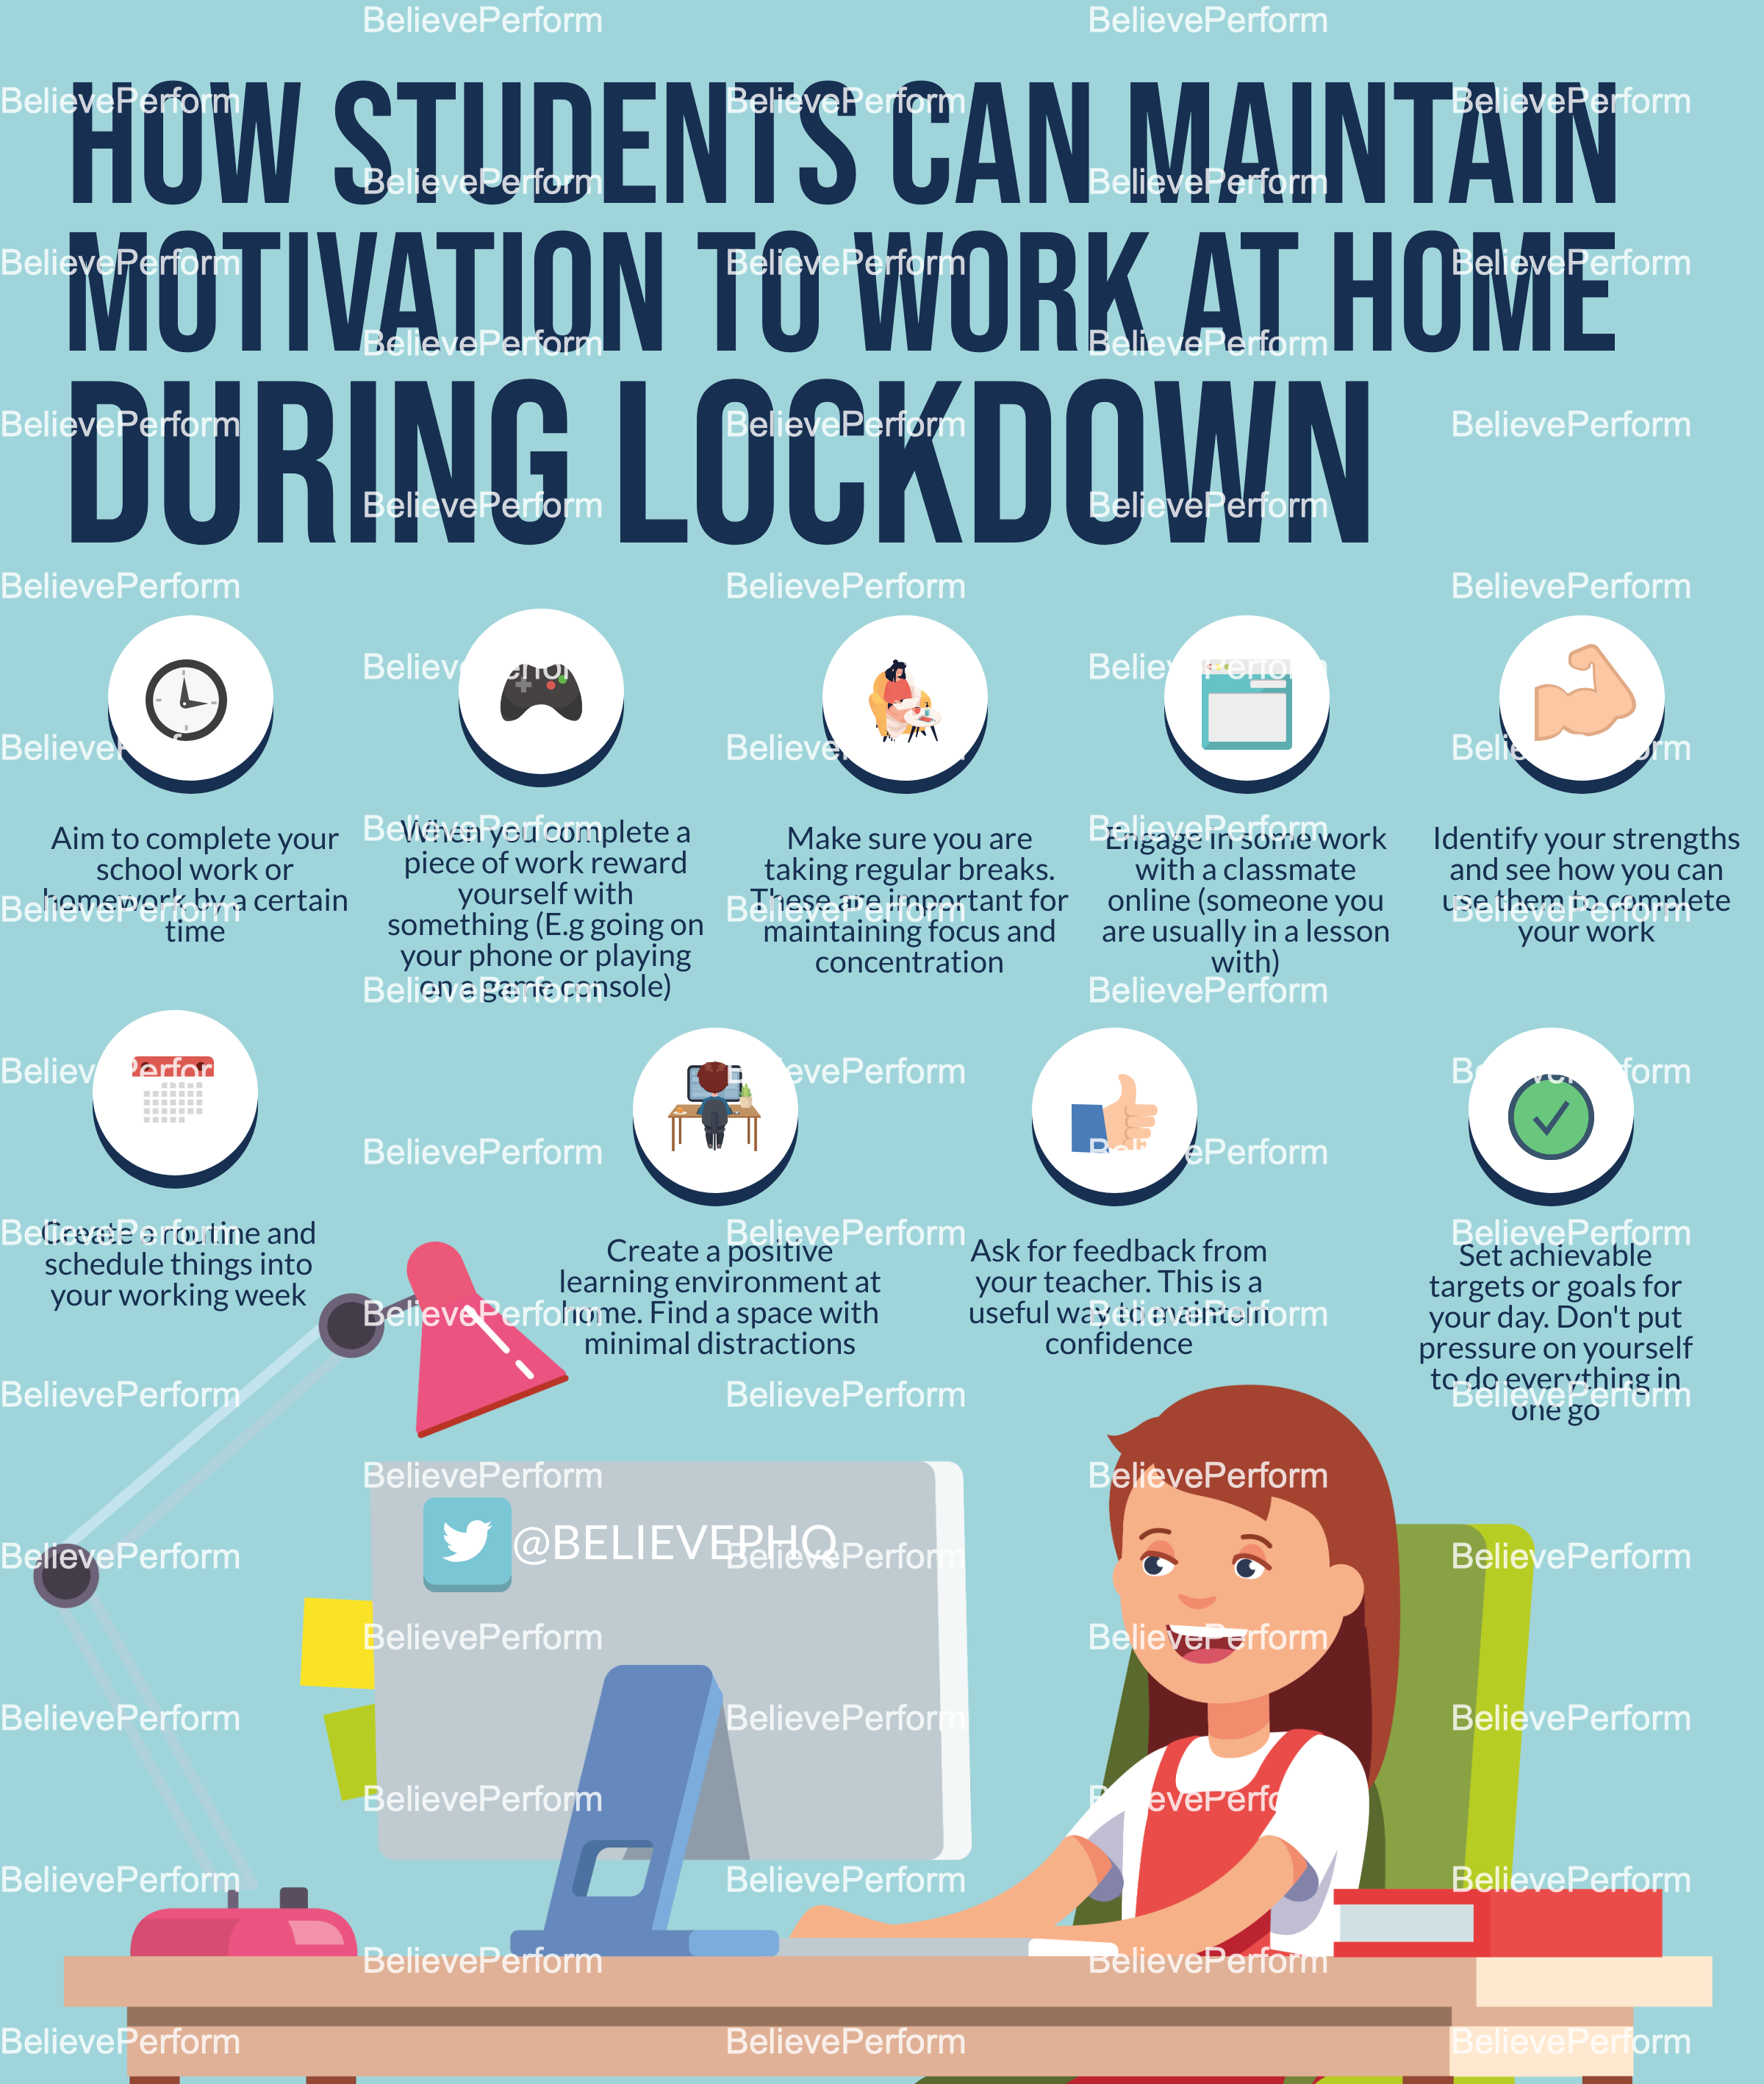 https://members.believeperform.com/wp-content/uploads/2020/05/How-students-can-maintain-motivation-to-work-at-home-during-lockdown.png